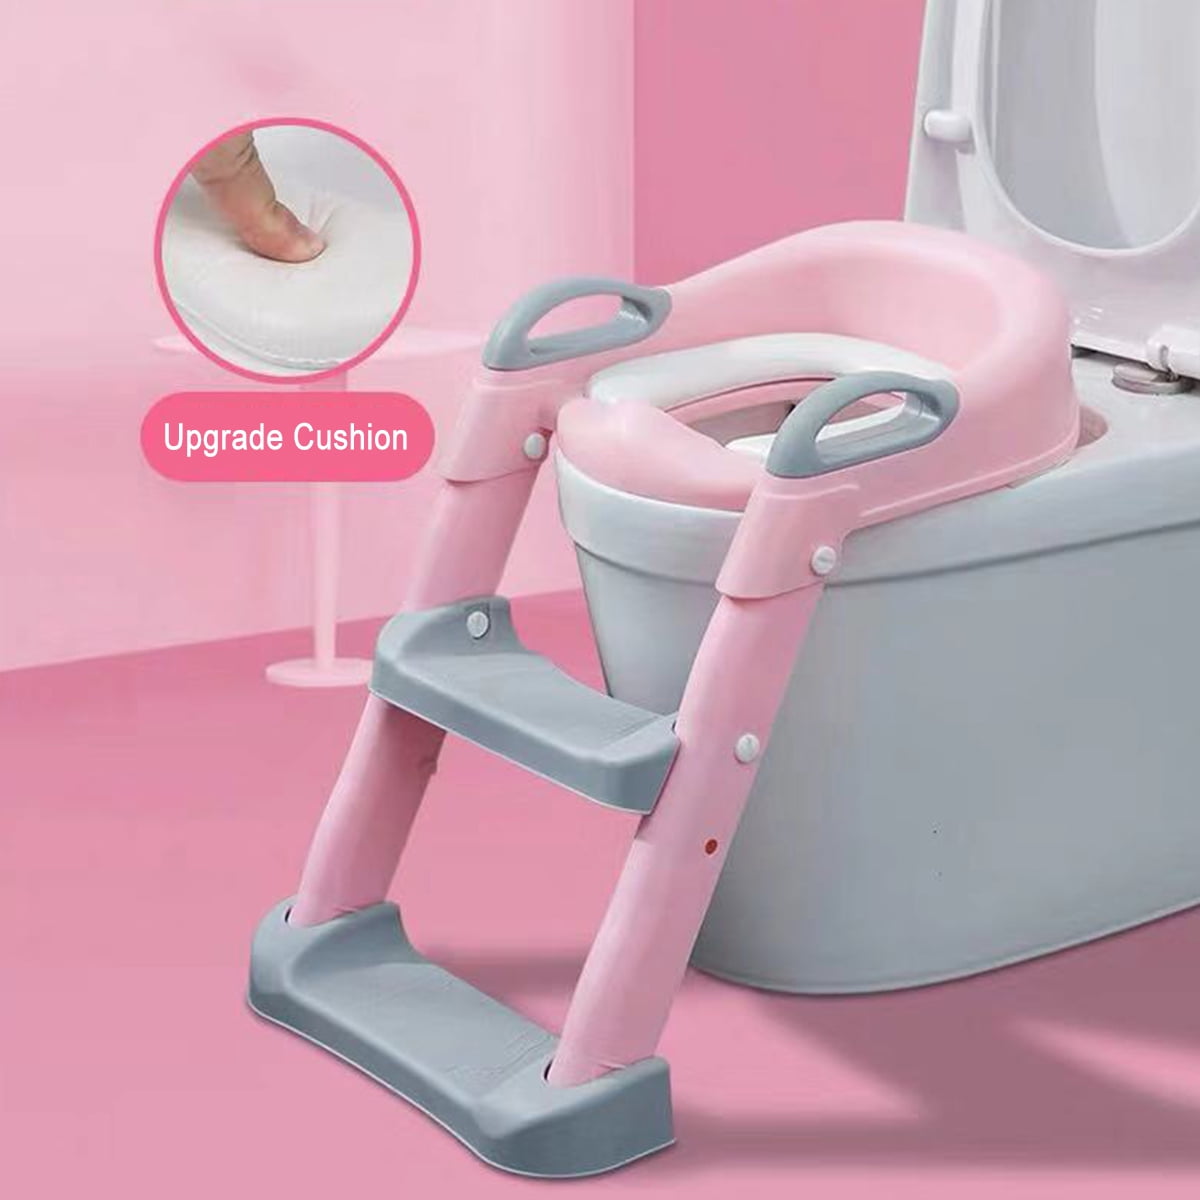 Children's Kids Toilet Ladder Potty Training Chair Step Up Ladder PINK and BLUE 